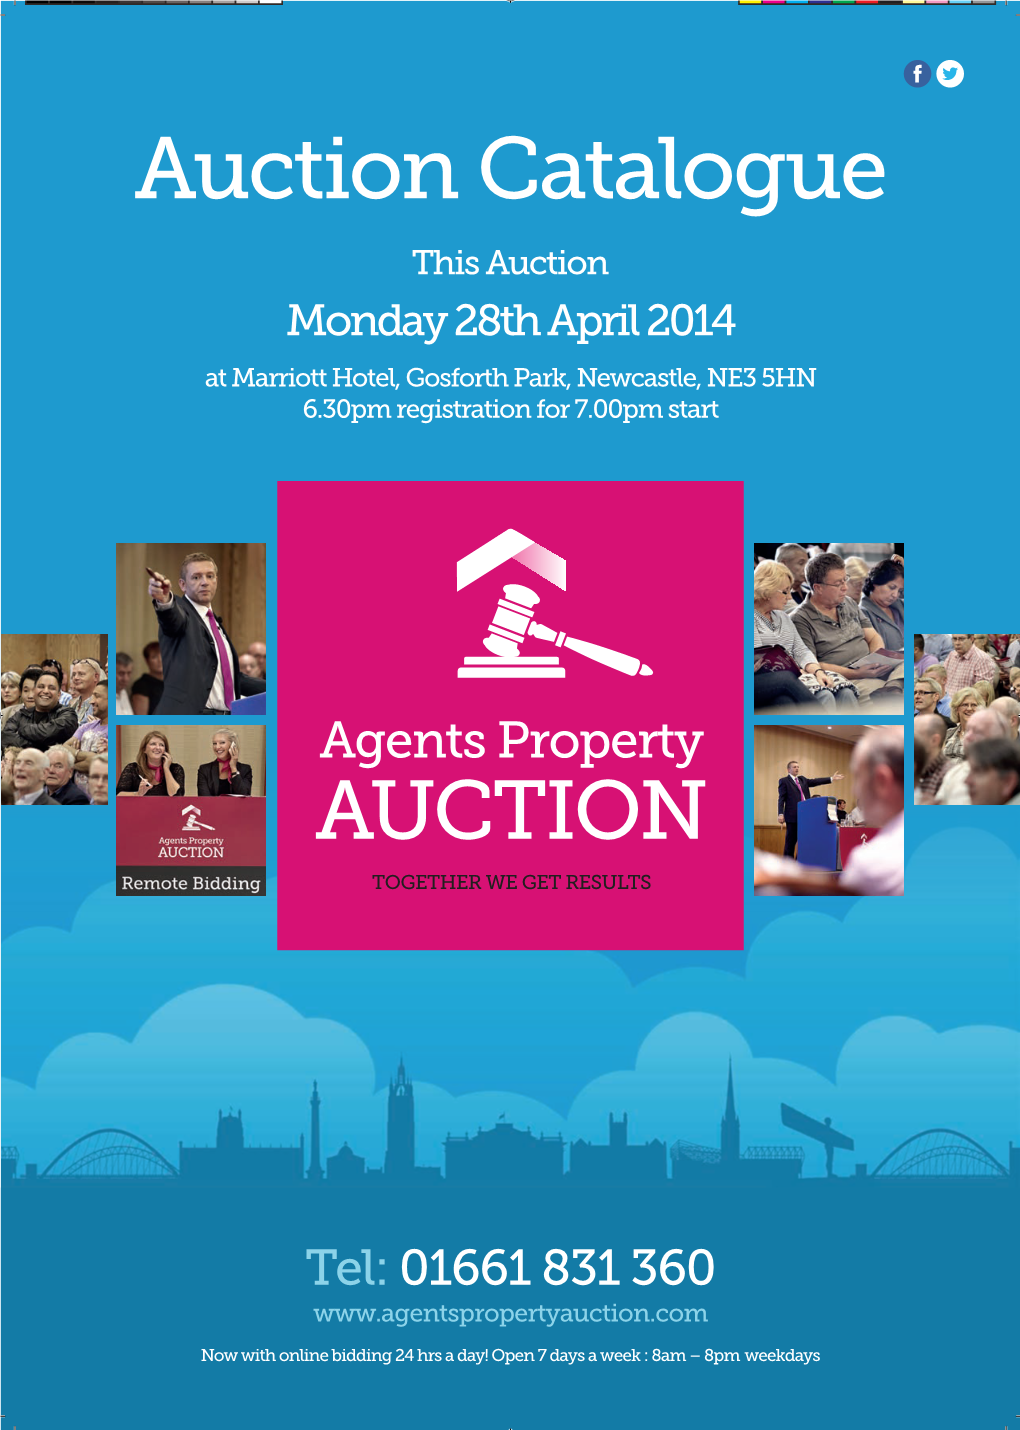 Auction Catalogue This Auction Monday 28Th April 2014 at Marriott Hotel, Gosforth Park, Newcastle, NE3 5HN 6.30Pm Registration for 7.00Pm Start